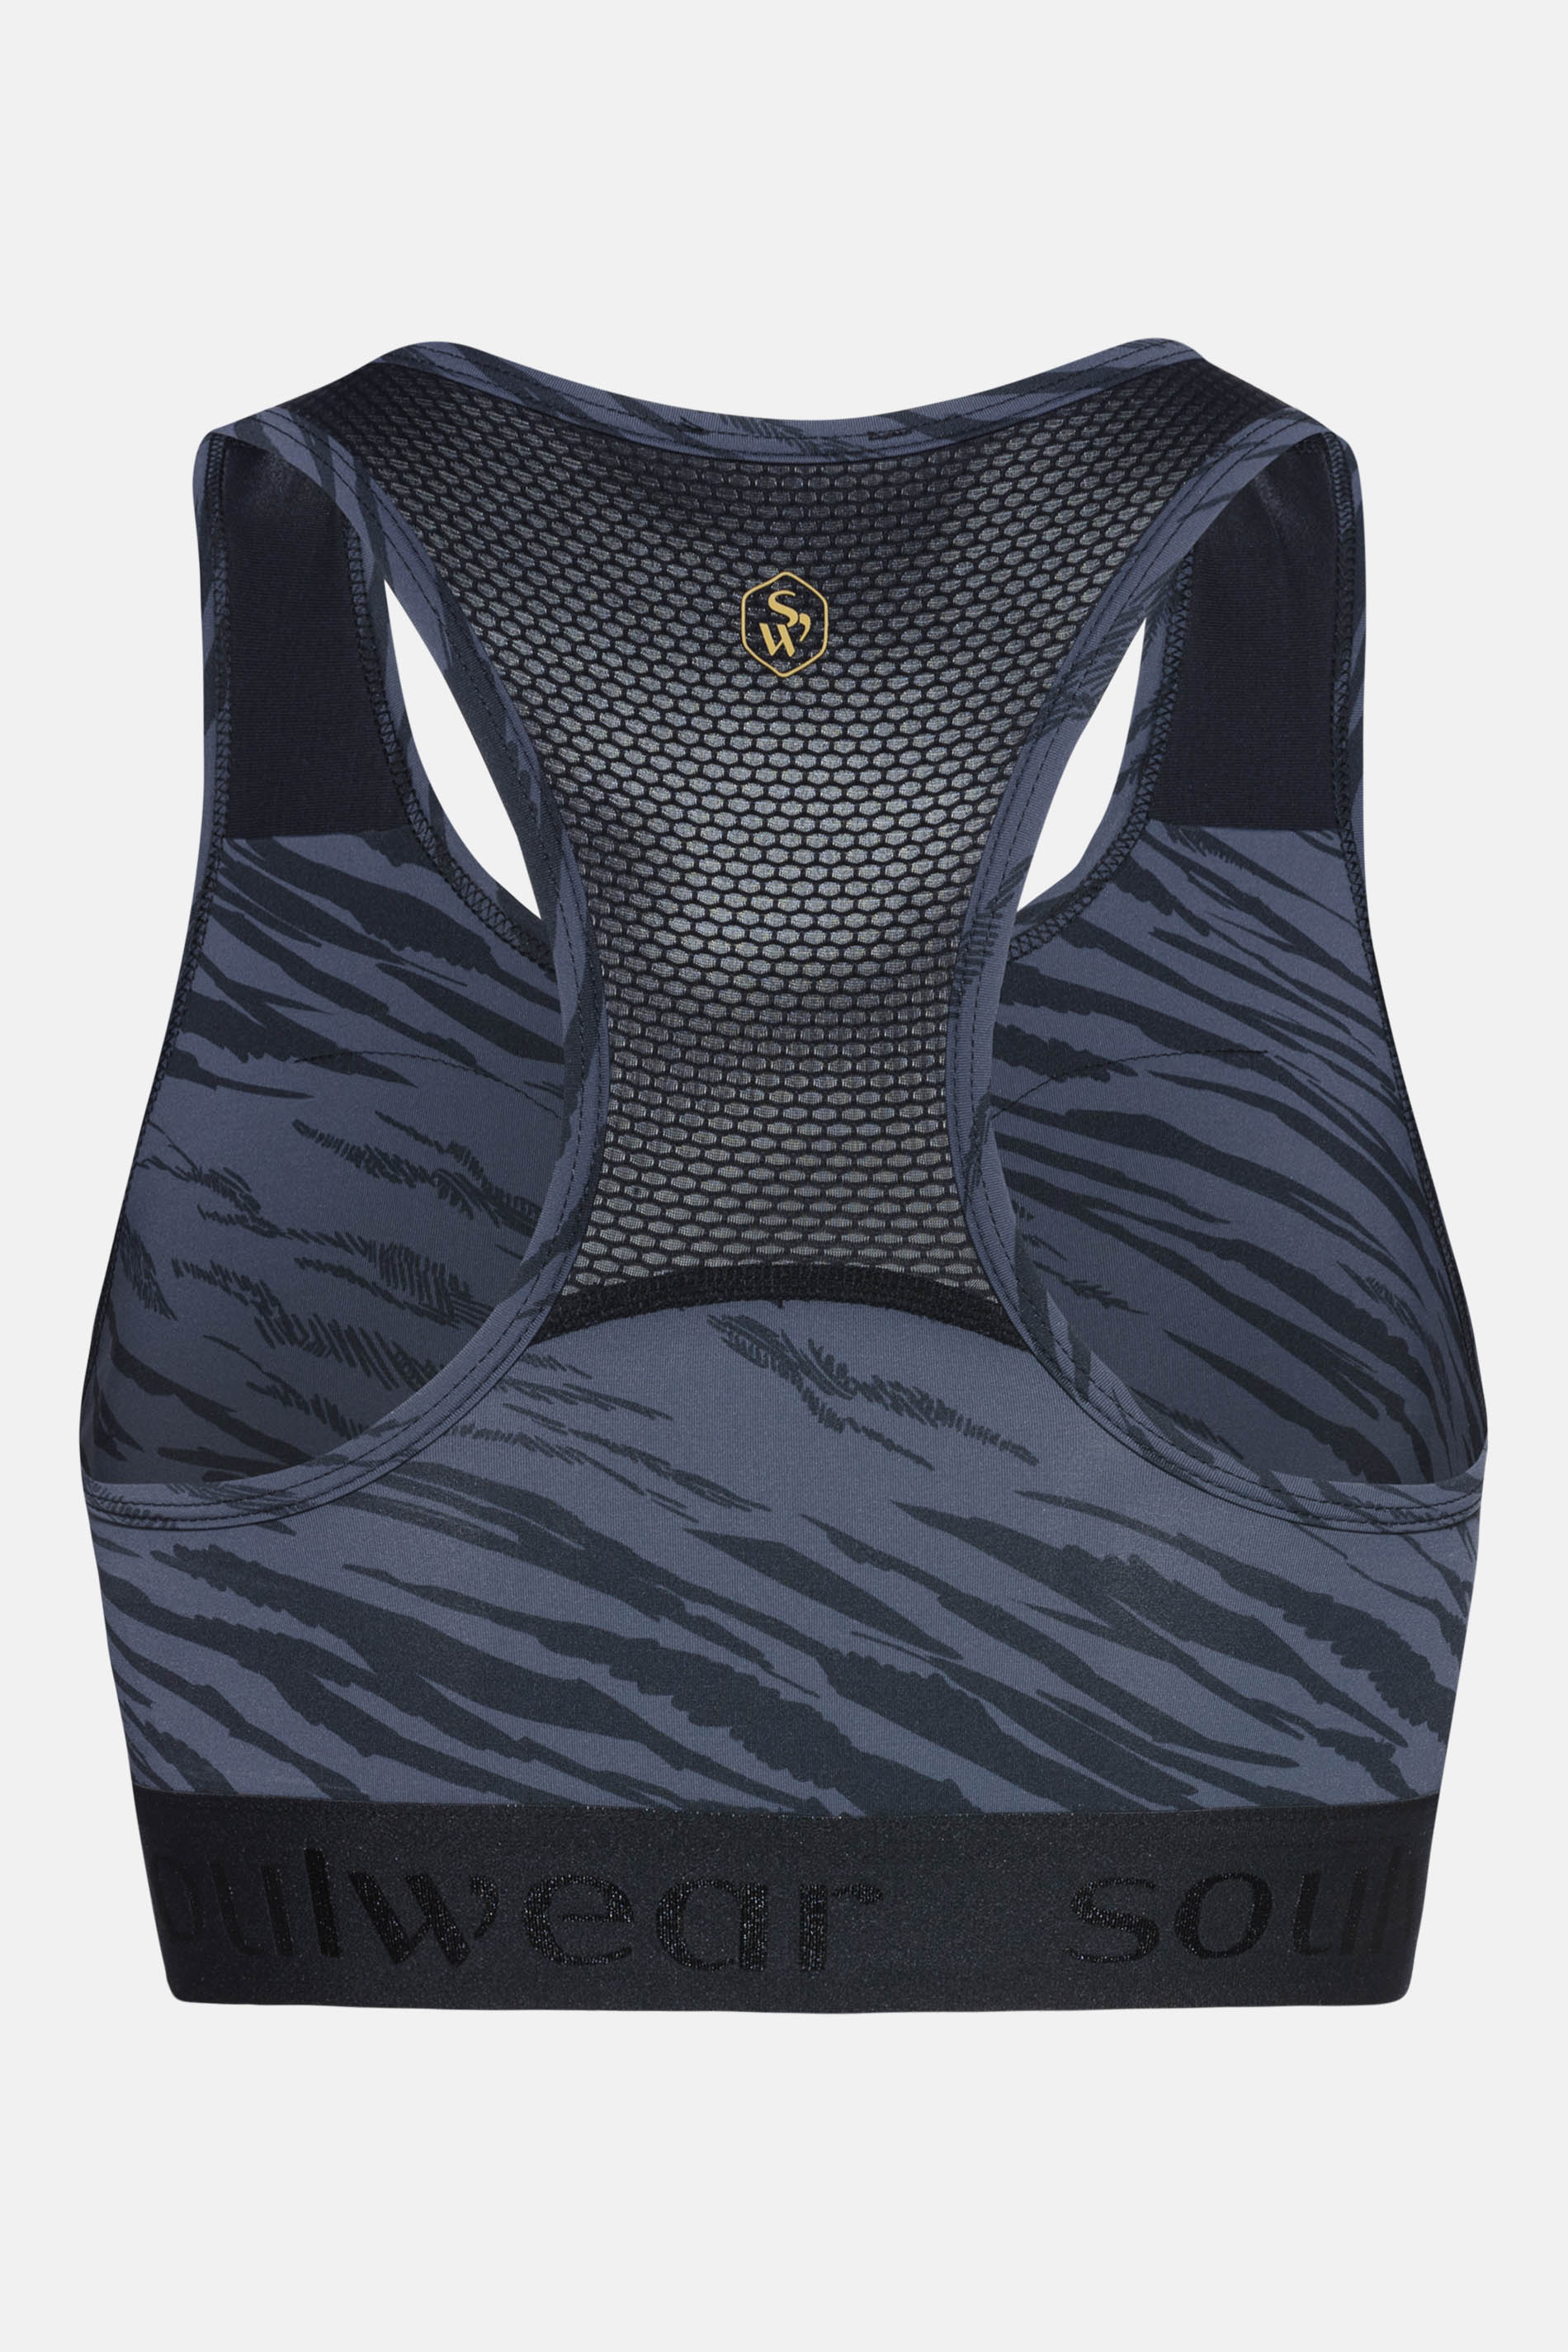 Bustier Carbon Serie Stretchable Uitknippen | mey®